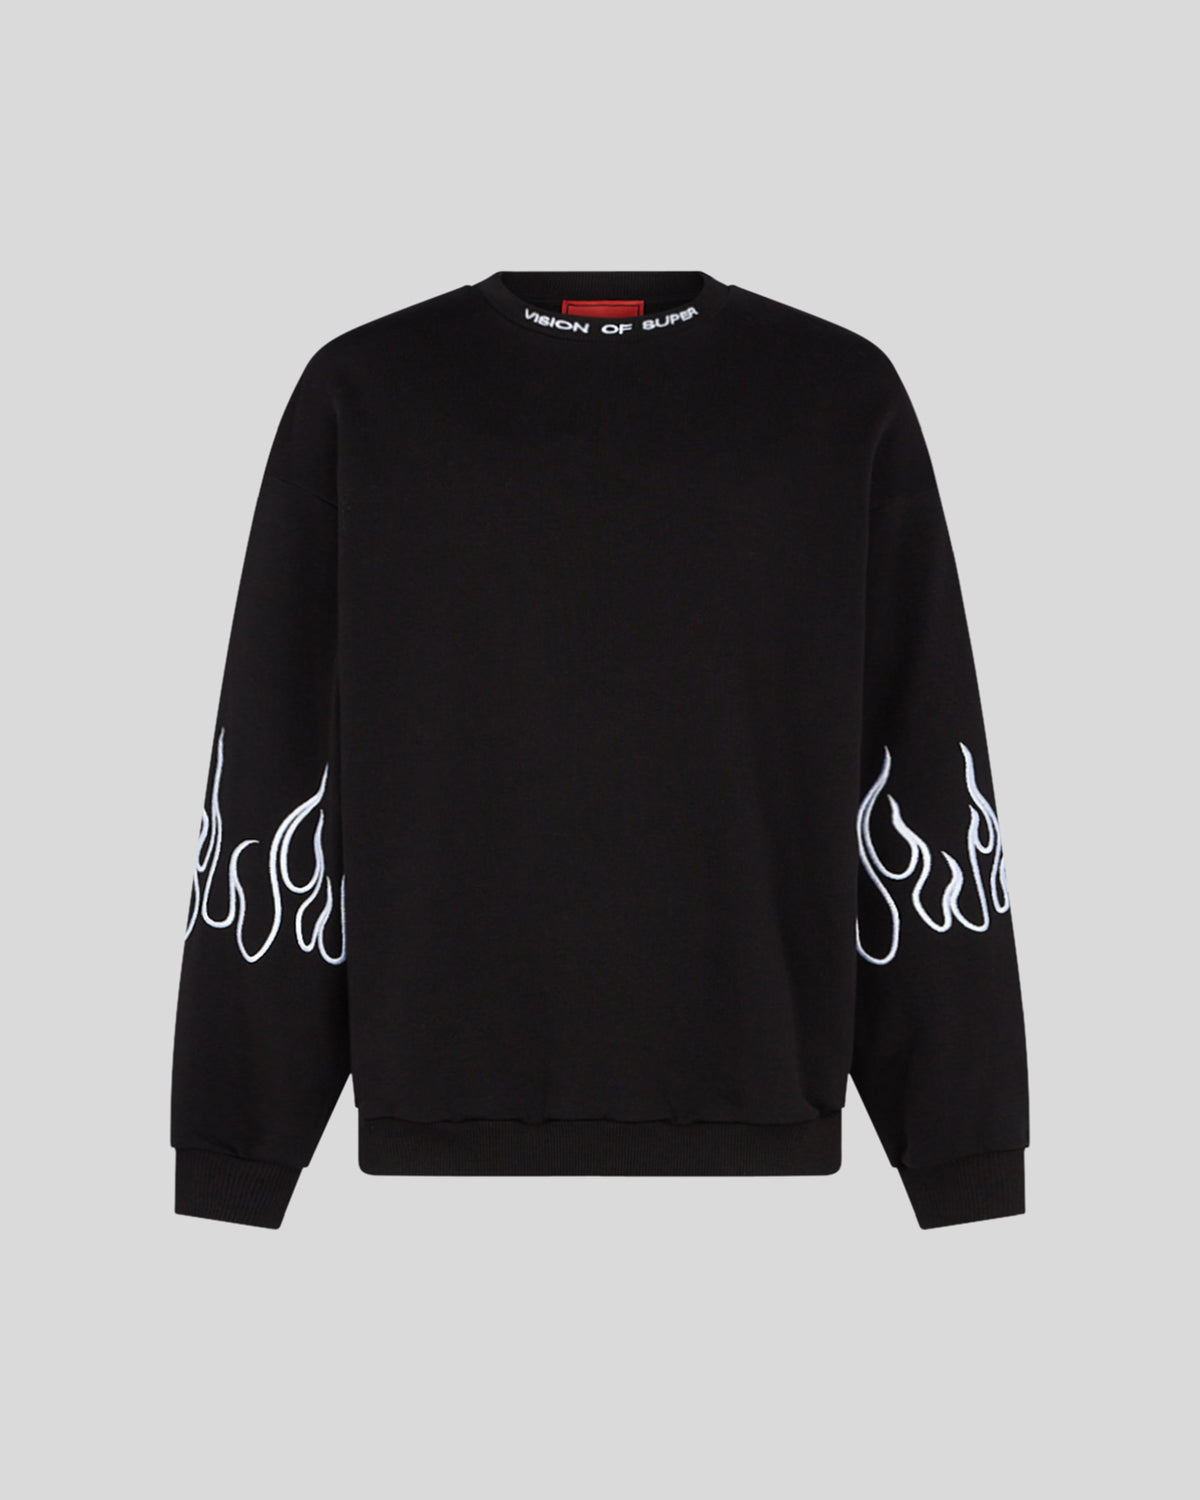 VISION OF SUPER BLACK CREWNECK WITH WHITE EMBROIDERED FLAMES